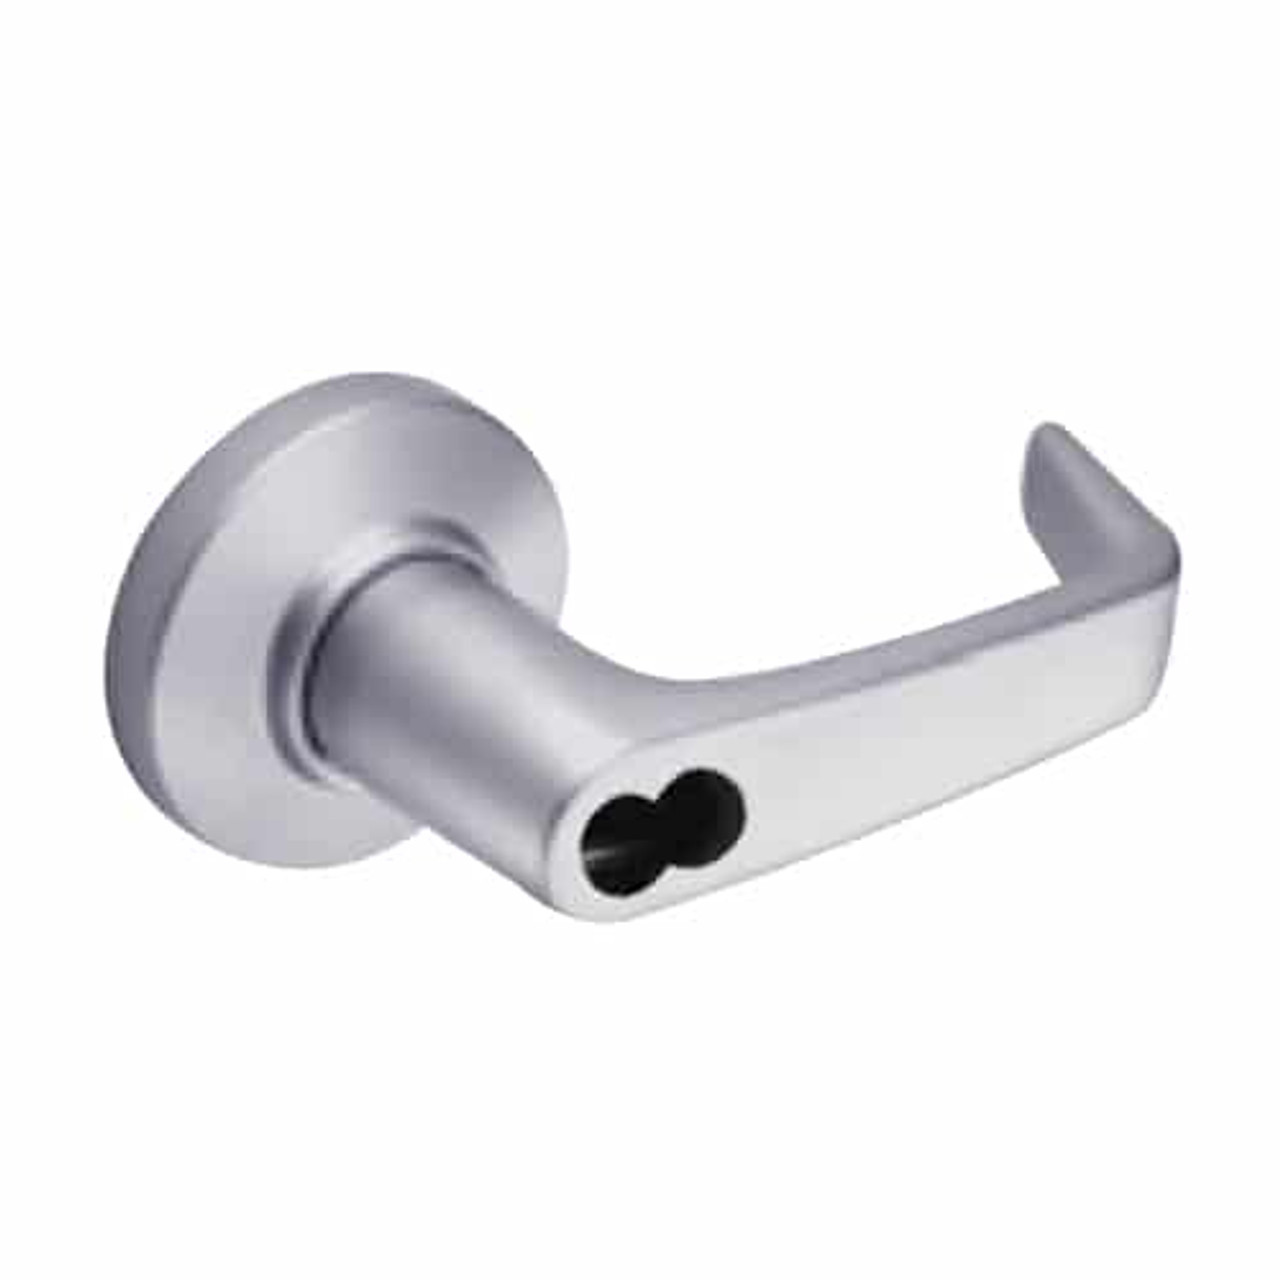 9K37W15CS3626LM Best 9K Series Institutional Cylindrical Lever Locks with Contour Angle with Return Lever Design Accept 7 Pin Best Core in Satin Chrome